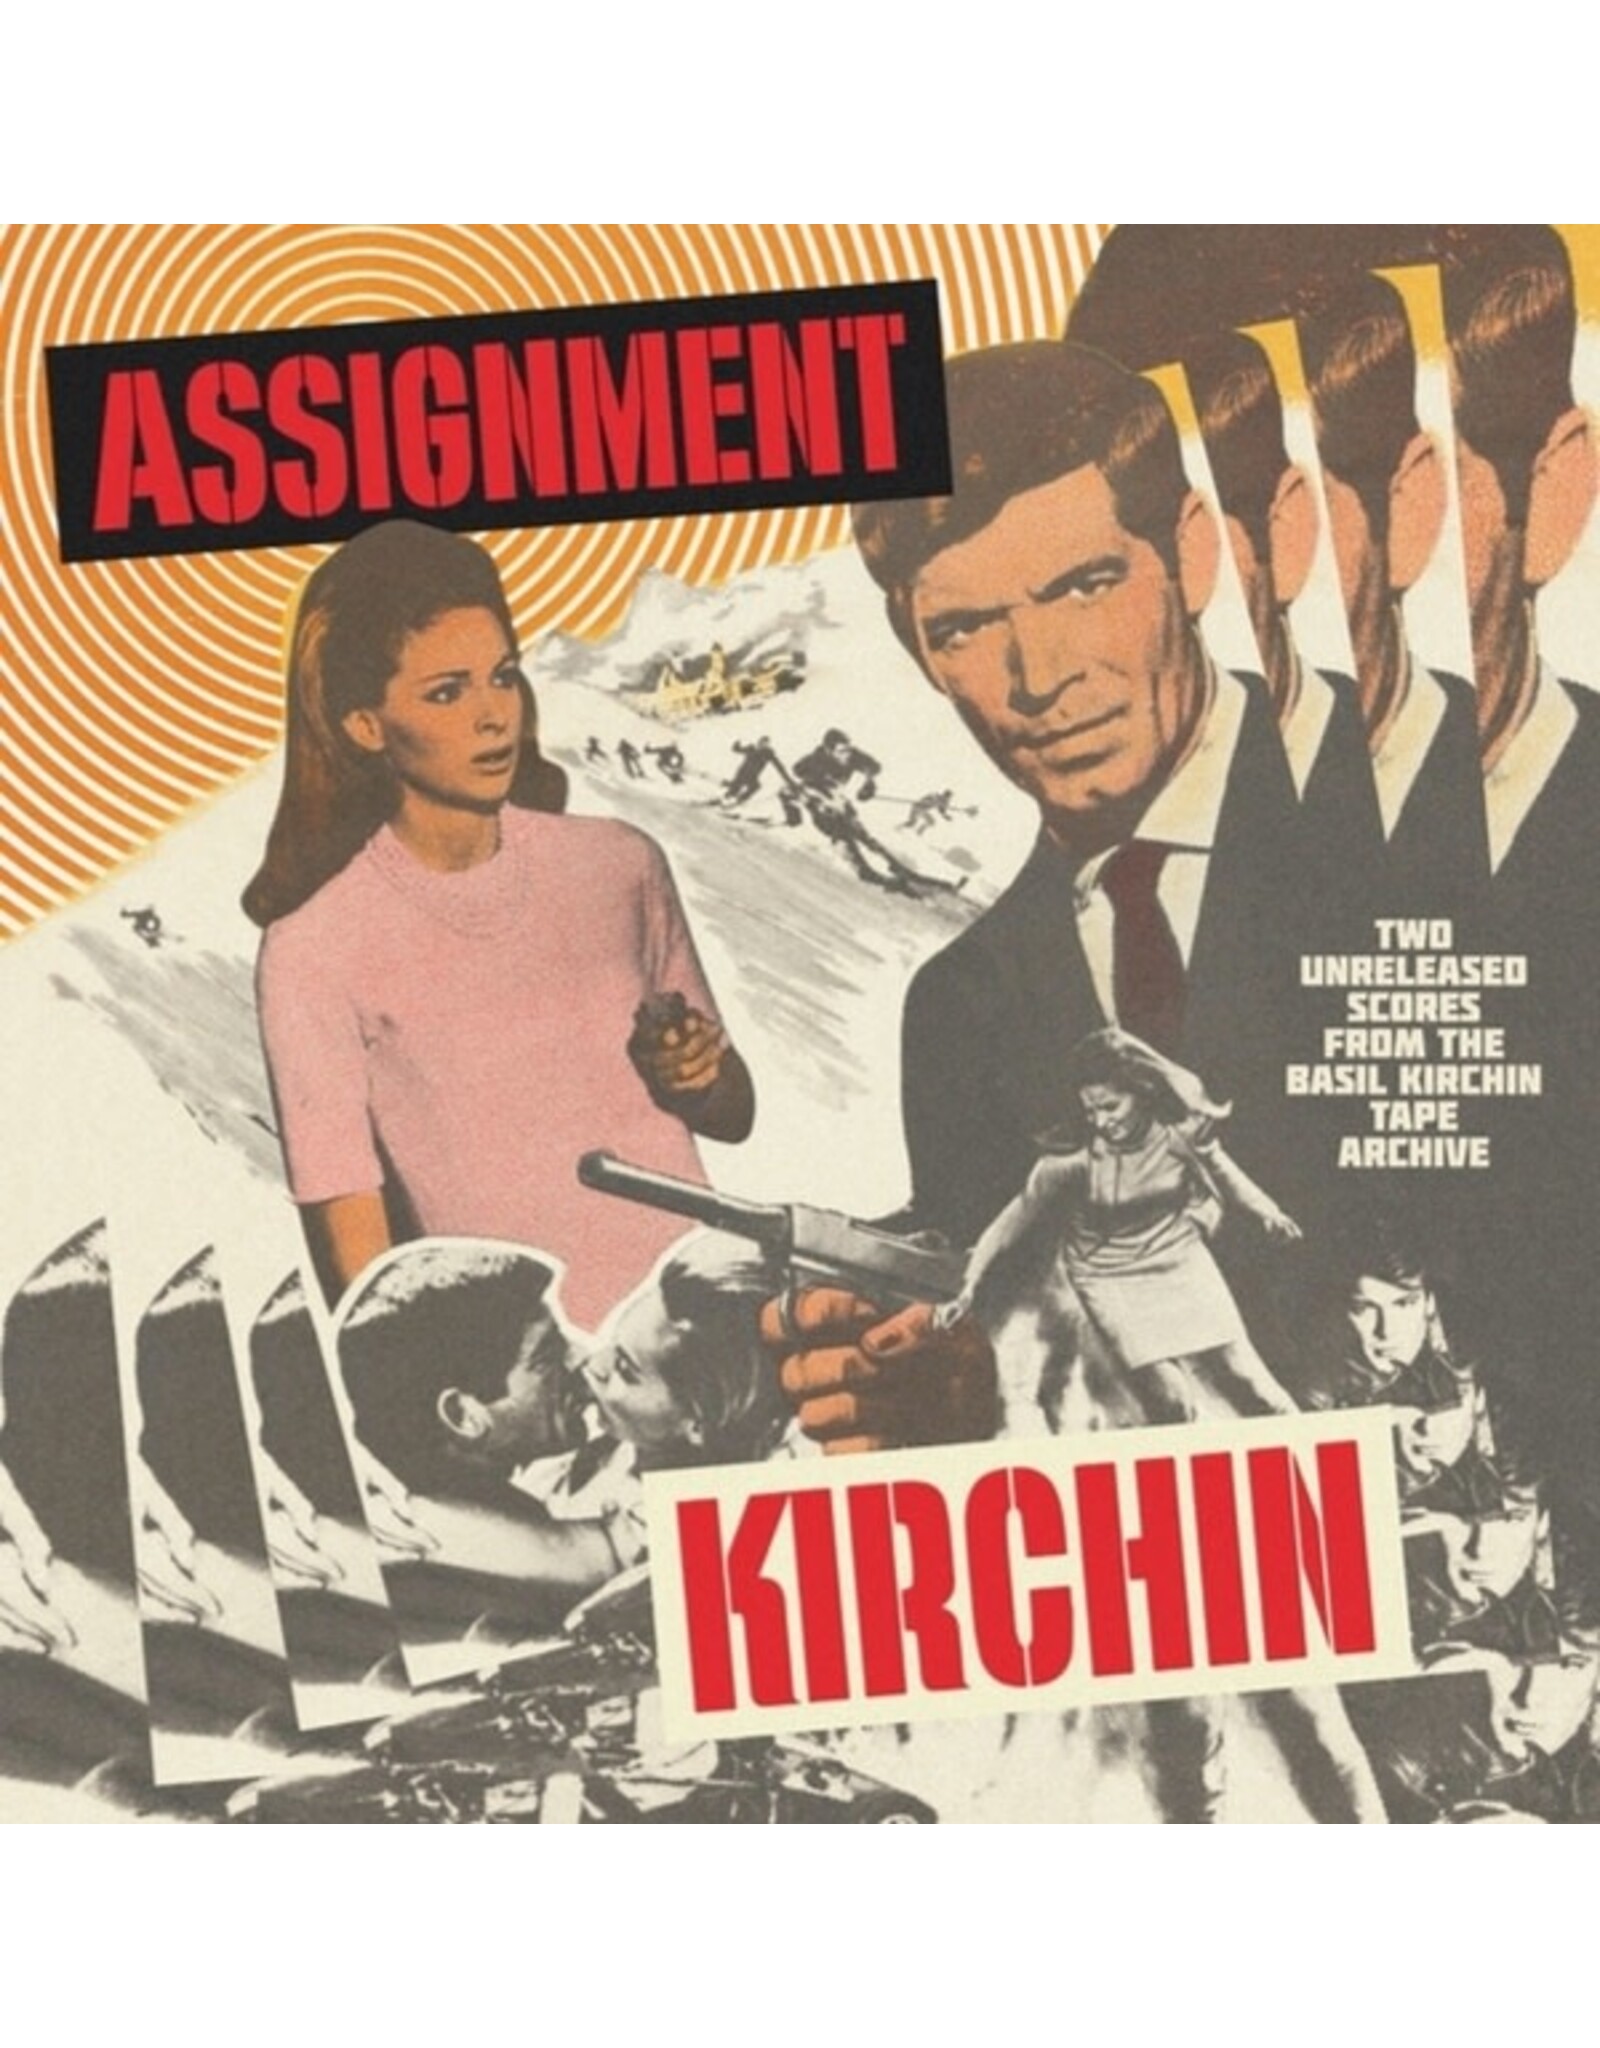 Trunk Kirchin, Basil: Assignment Kirchin: Two Unreleased Scores From The Basil Kirchin Tape Archive LP